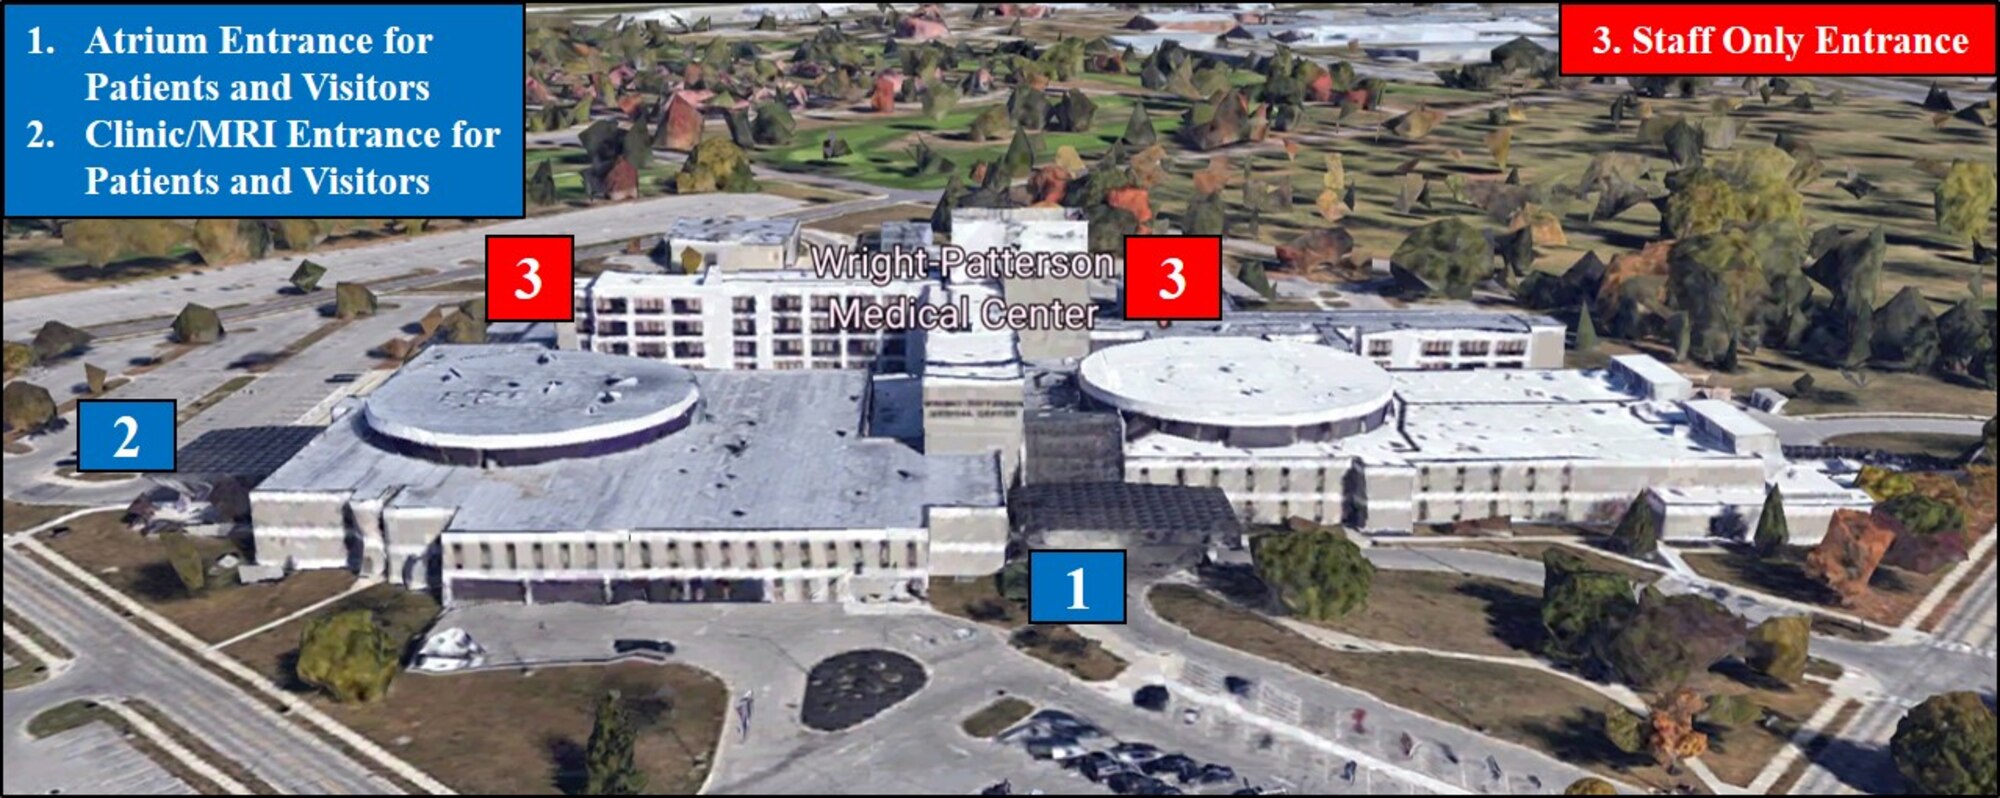 o ensure the continued health and safety of patients, staff and visitors, the Wright-Patterson Medical Center is limiting entry by patients into the hospital using two designated entry points.  In addition, the medical center has instituted precautionary screening. (U.S. Air Force graphic)